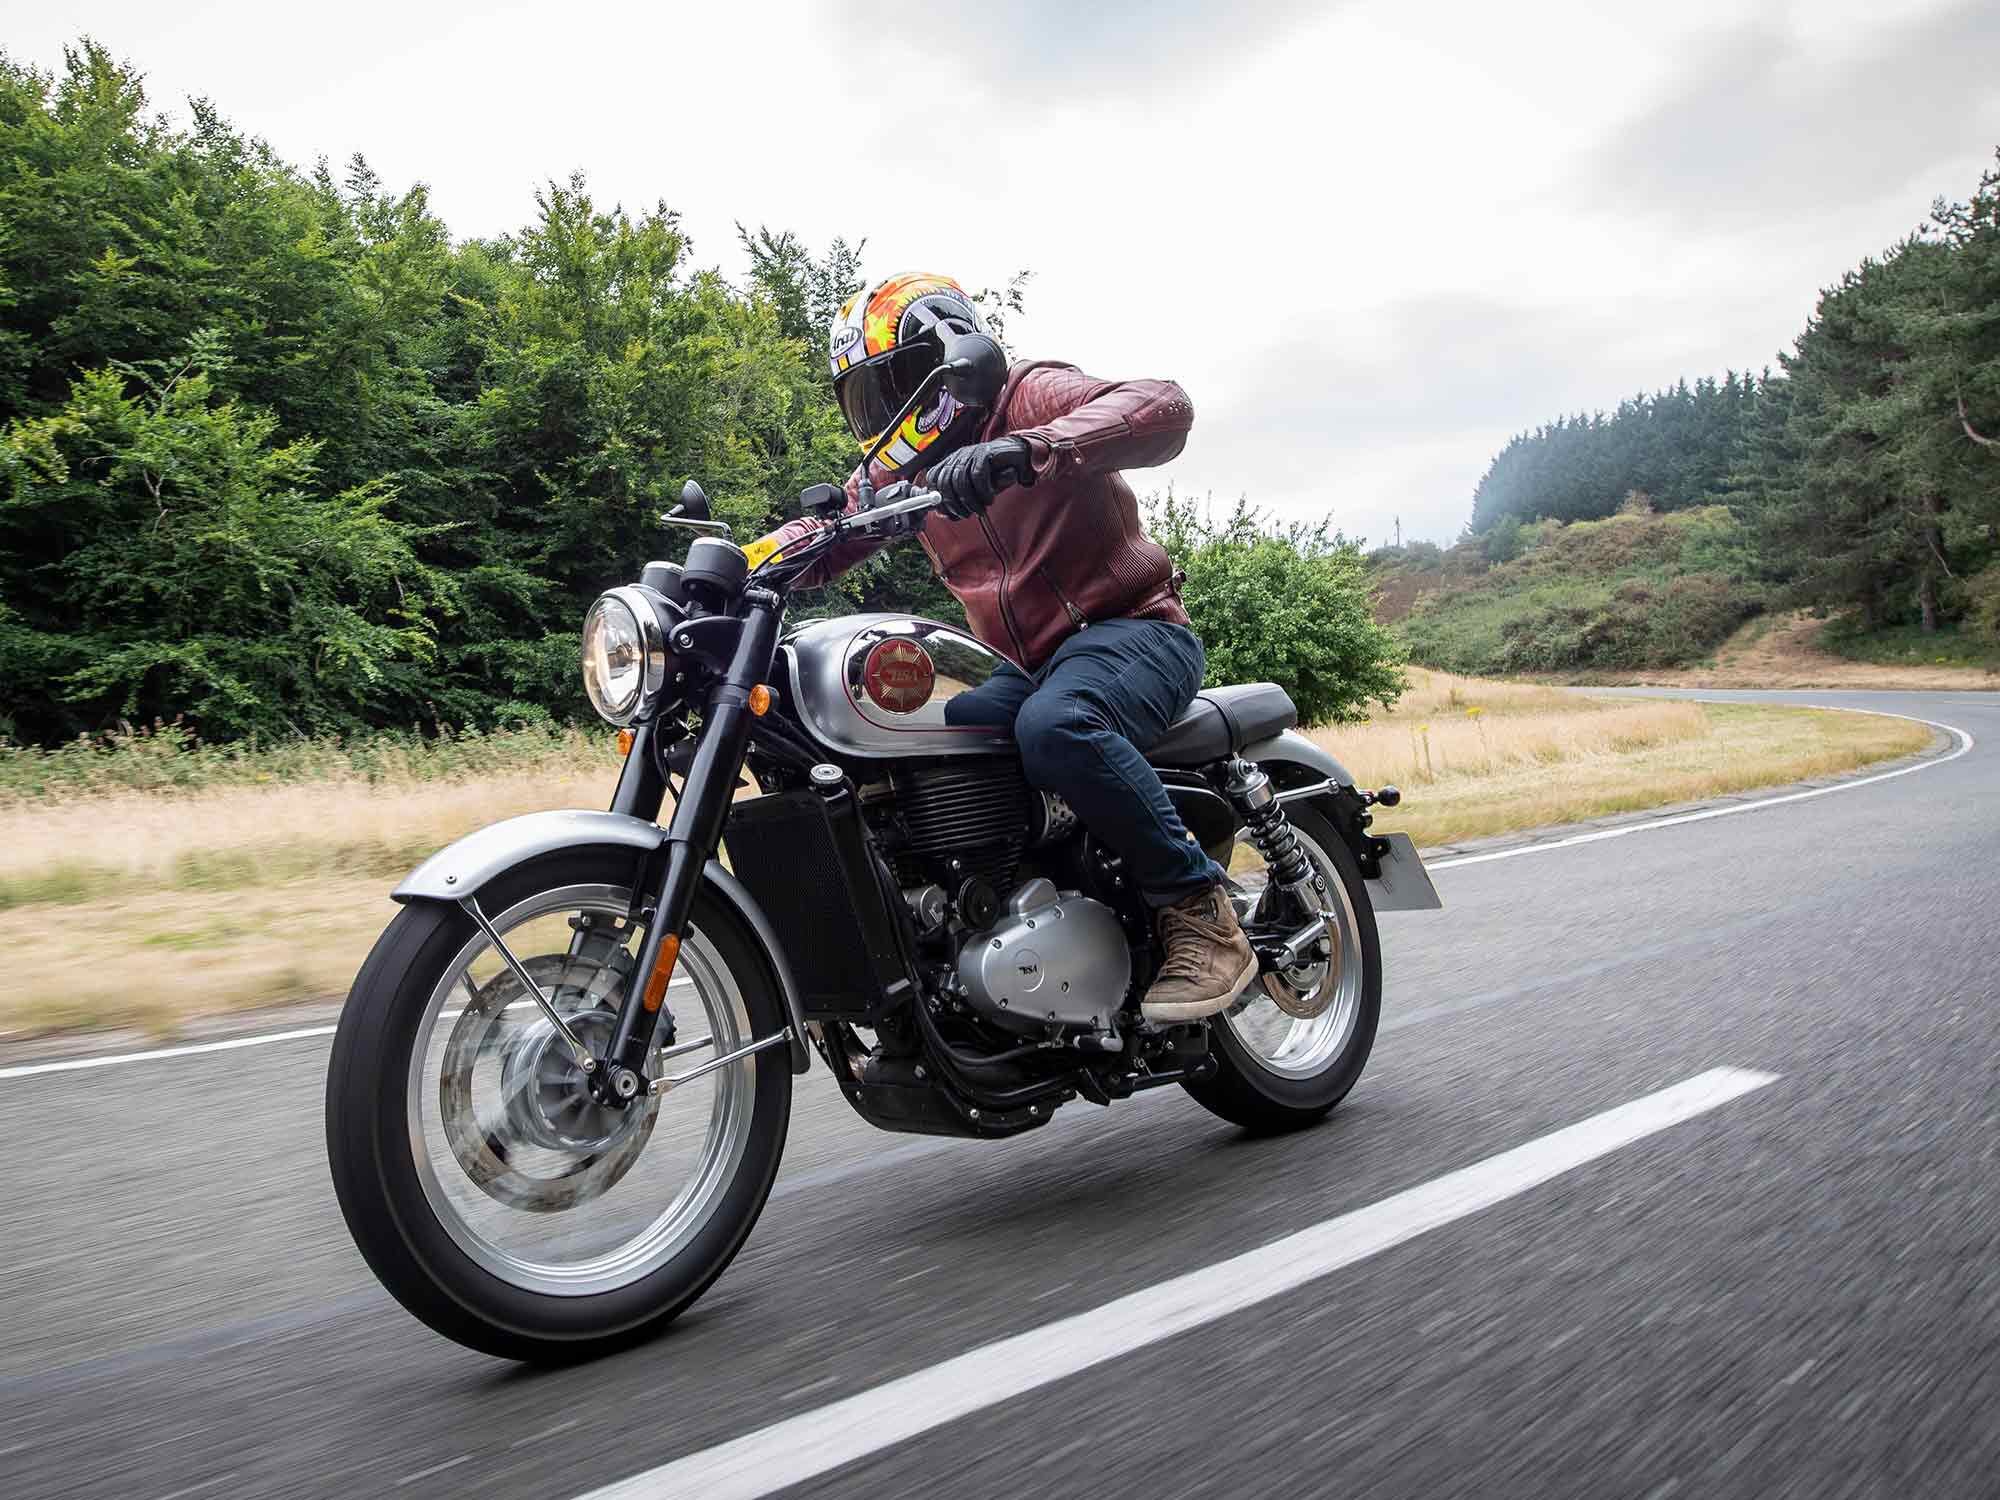 <i>Motorcyclist</i>’s test ride was conducted at the Millbrook Proving Ground near London, and while the test facility has the appearance of a real UK road (it’s where James Bond rolled his Aston Martin in <i>Casino Royale</i>!).